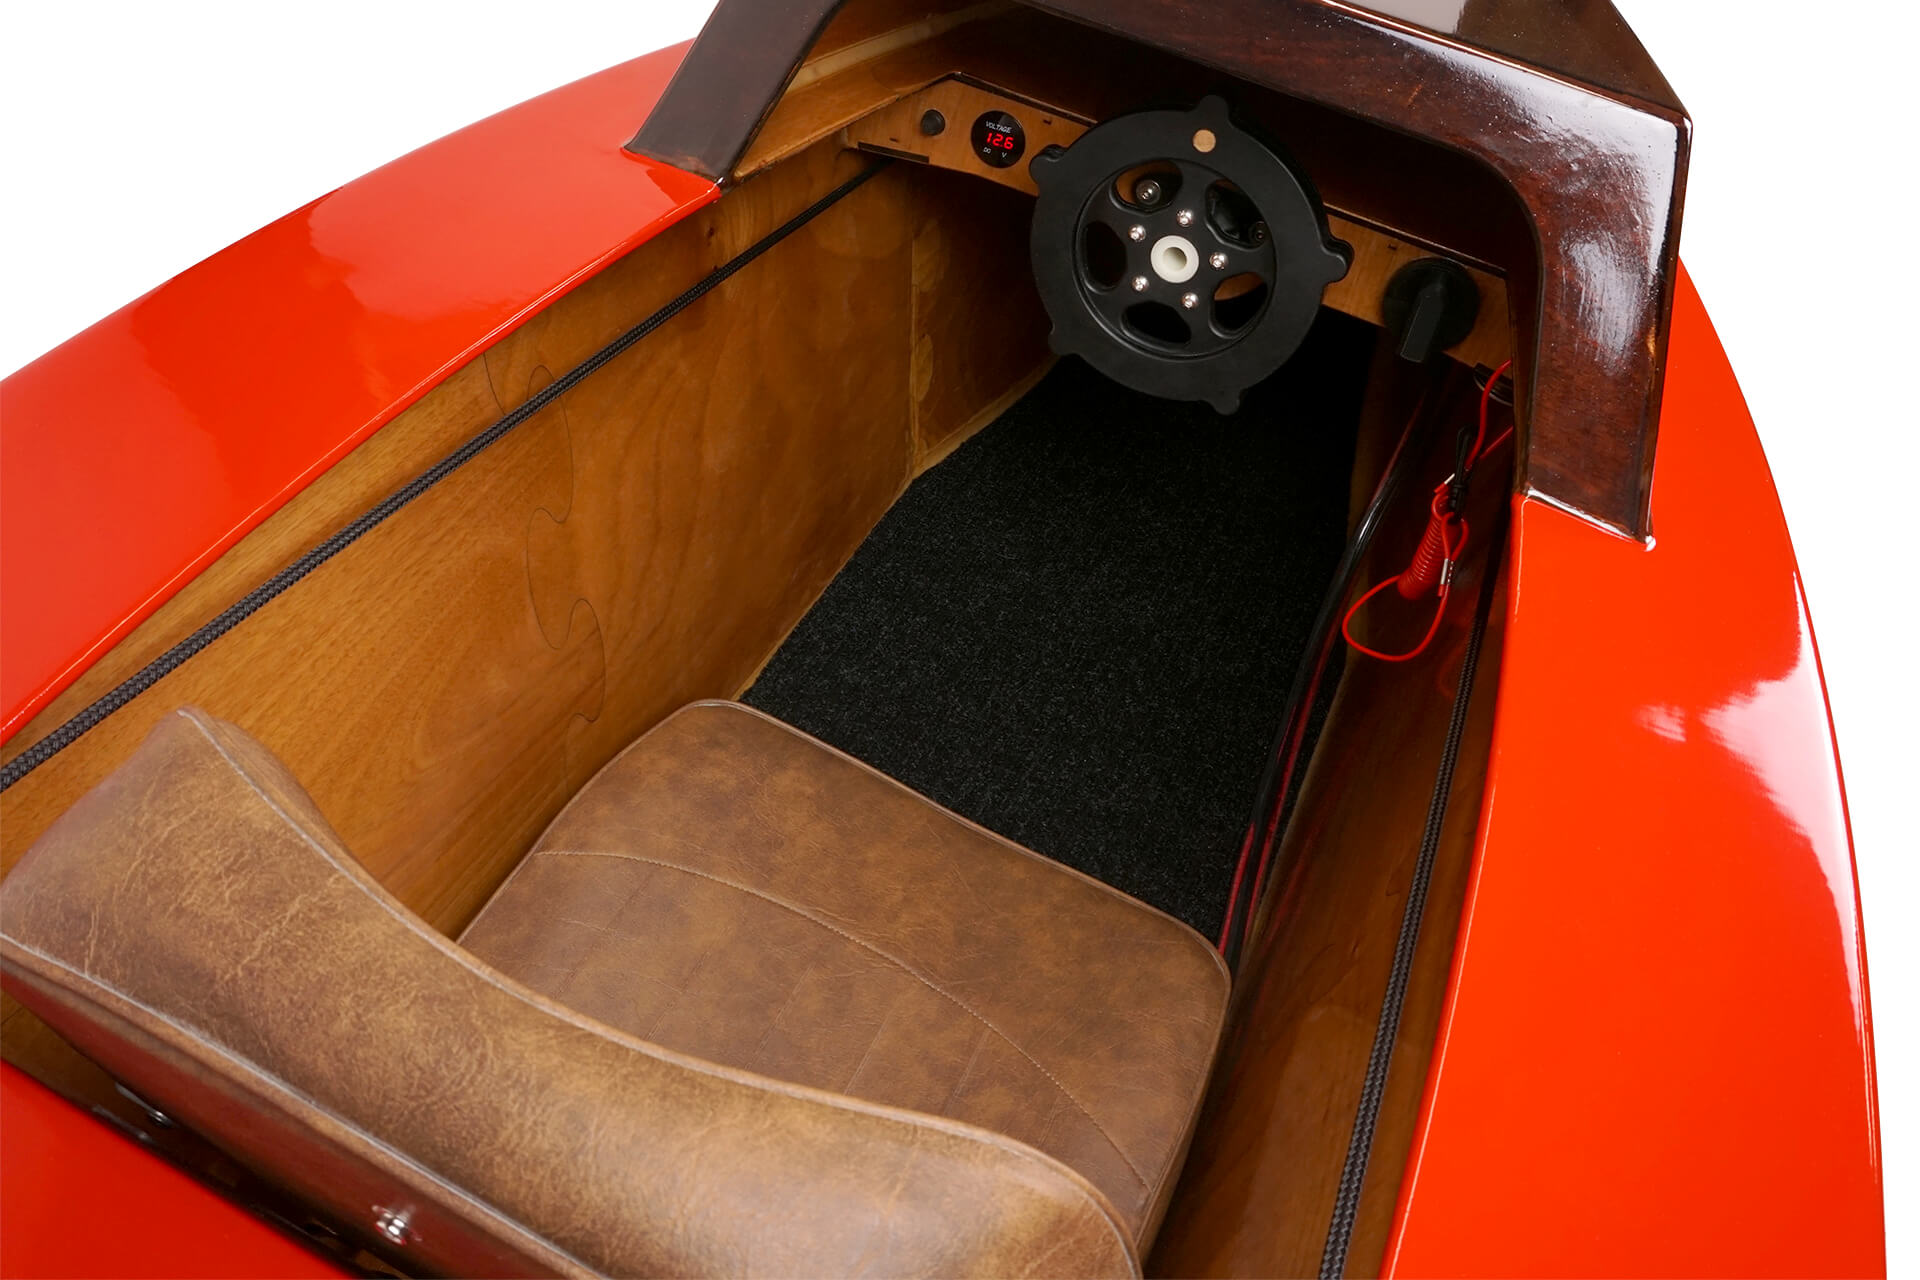 A detail view of the mini electric boat seat